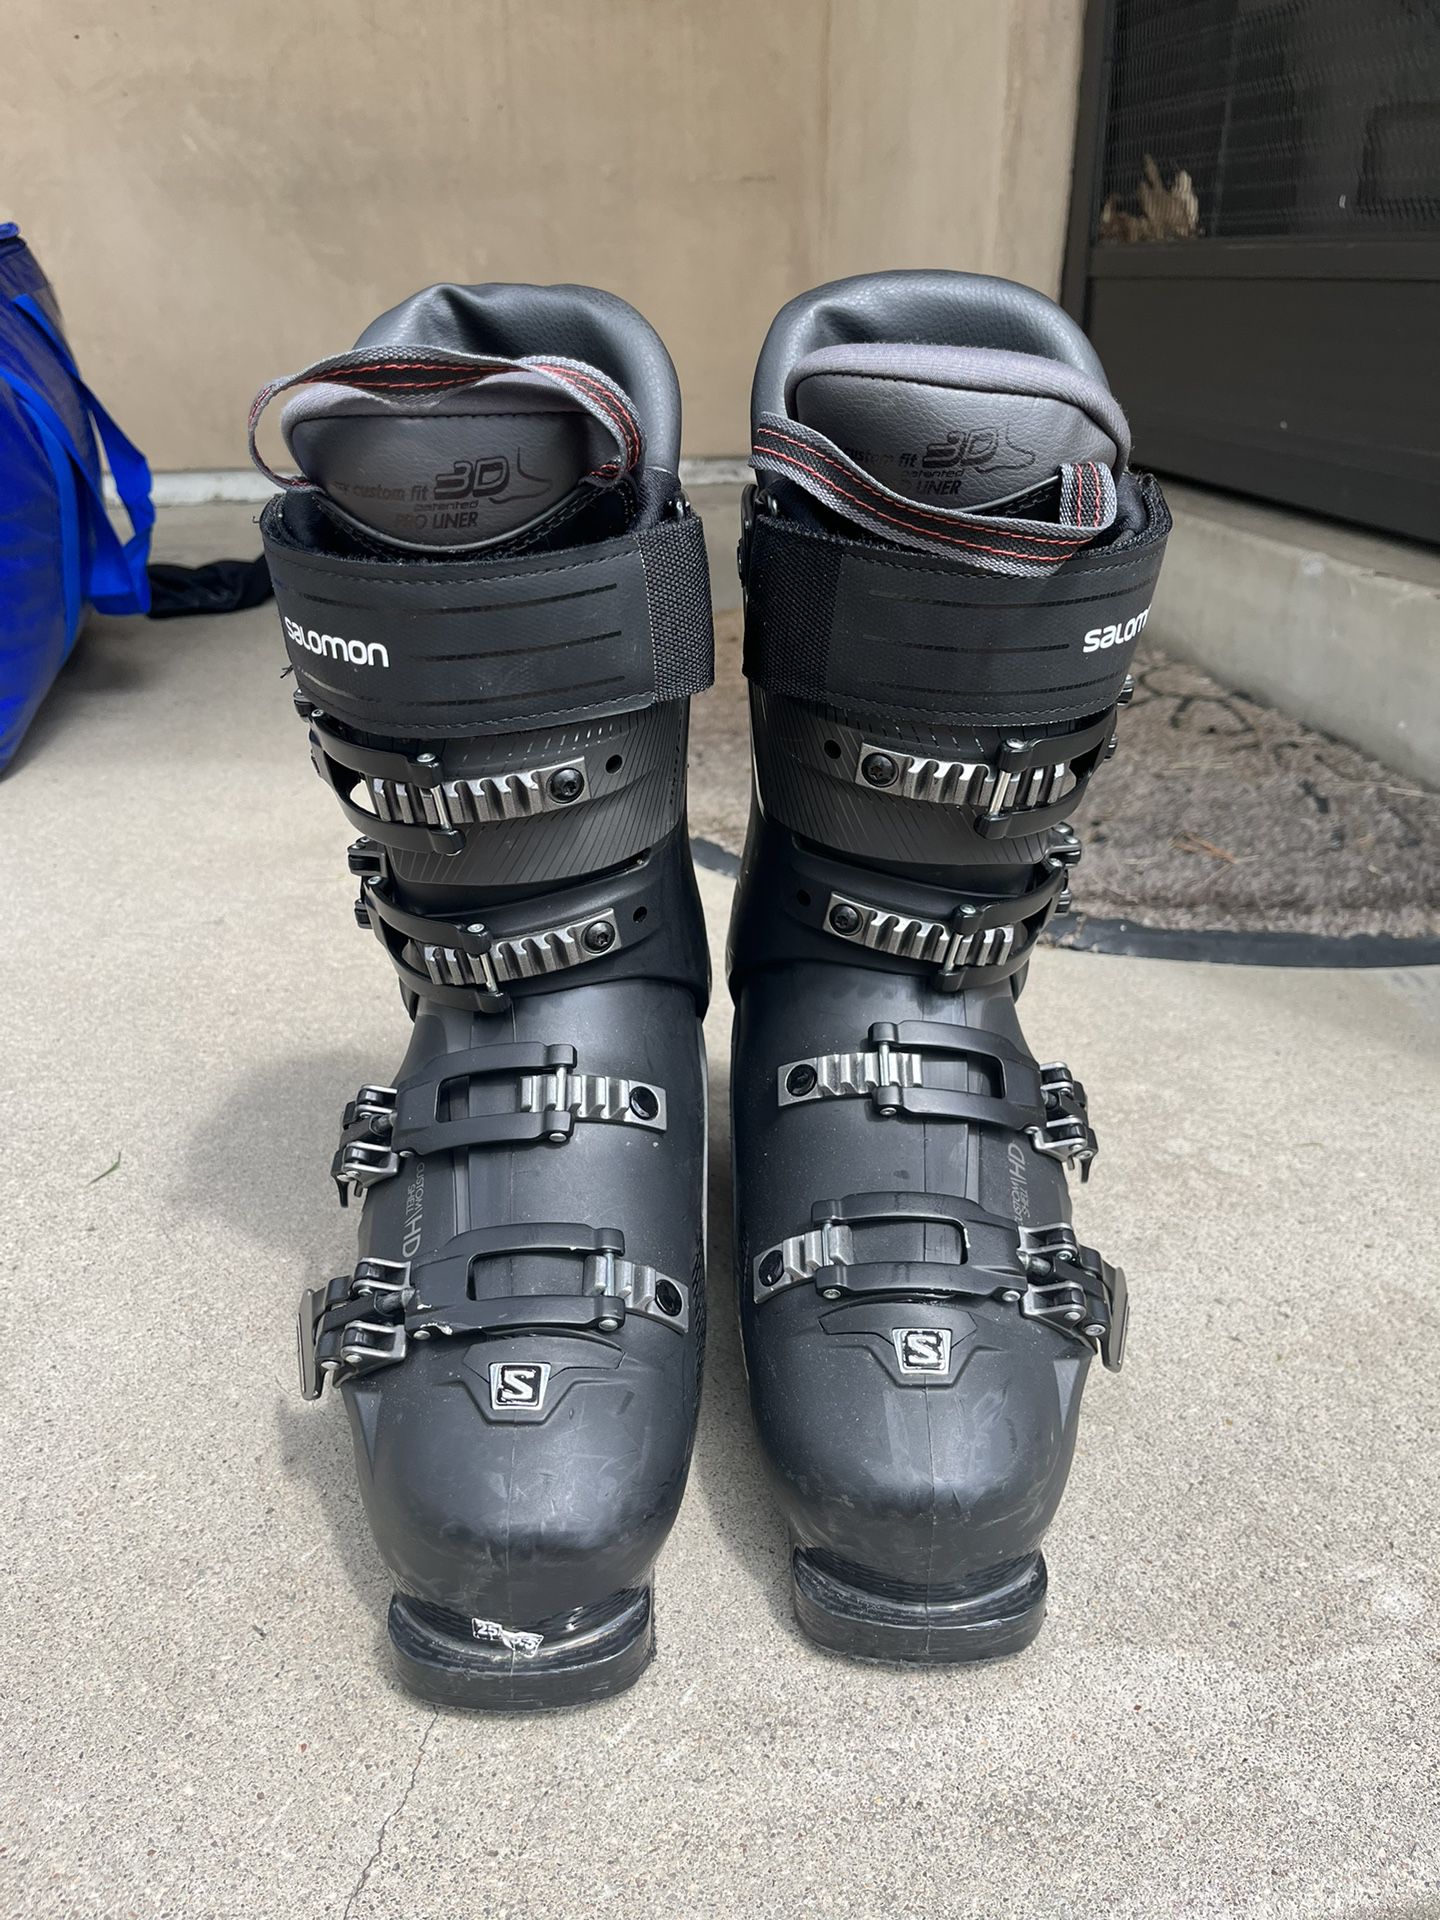 Salomon S 120 Boots Size 25/25.5 for in Denver, CO - OfferUp